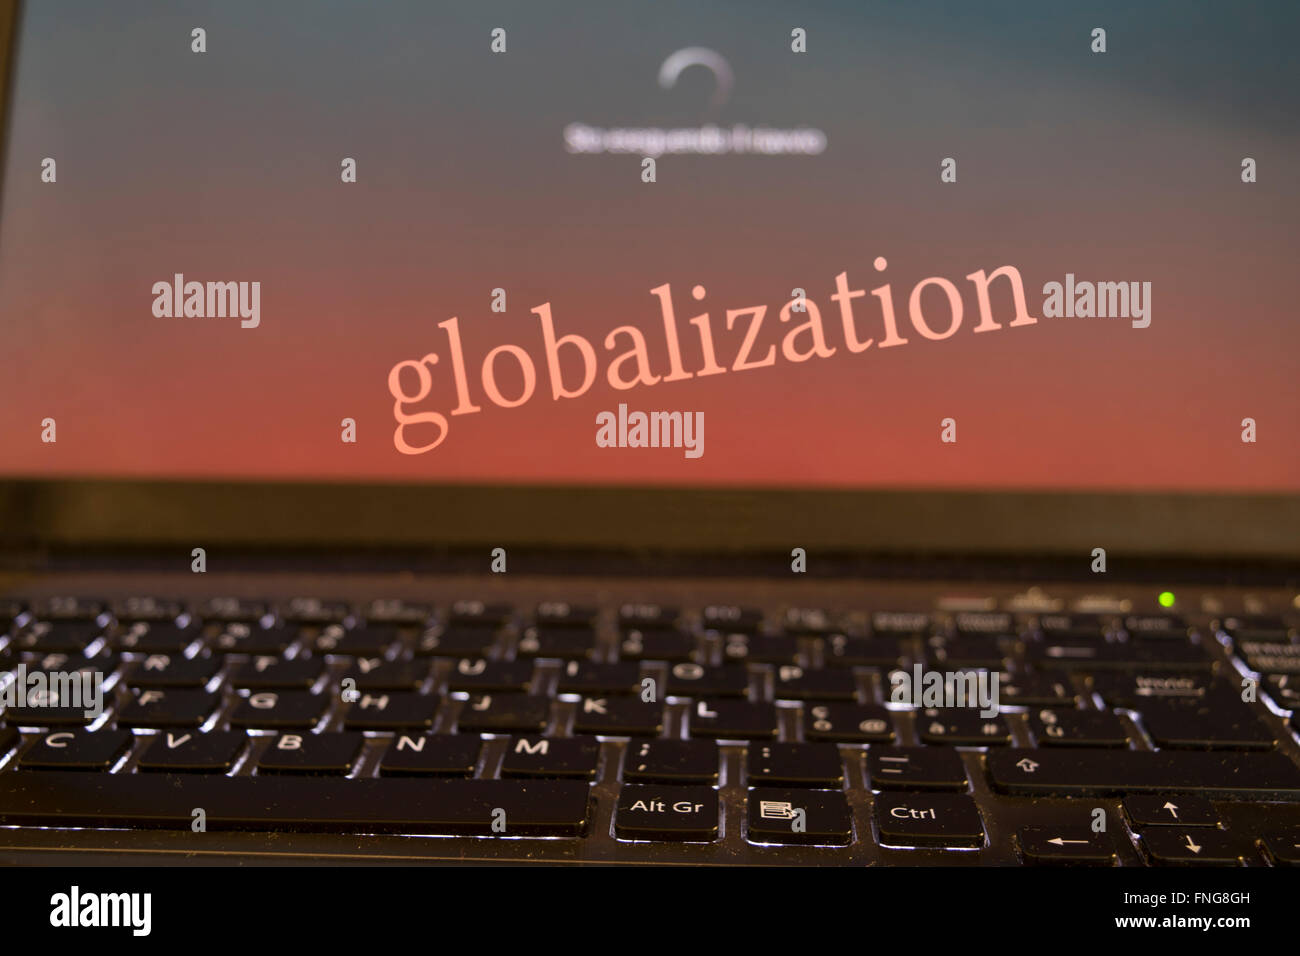 concept of globalizatione and modern technologies with a writen on the desktop of the a computer Stock Photo